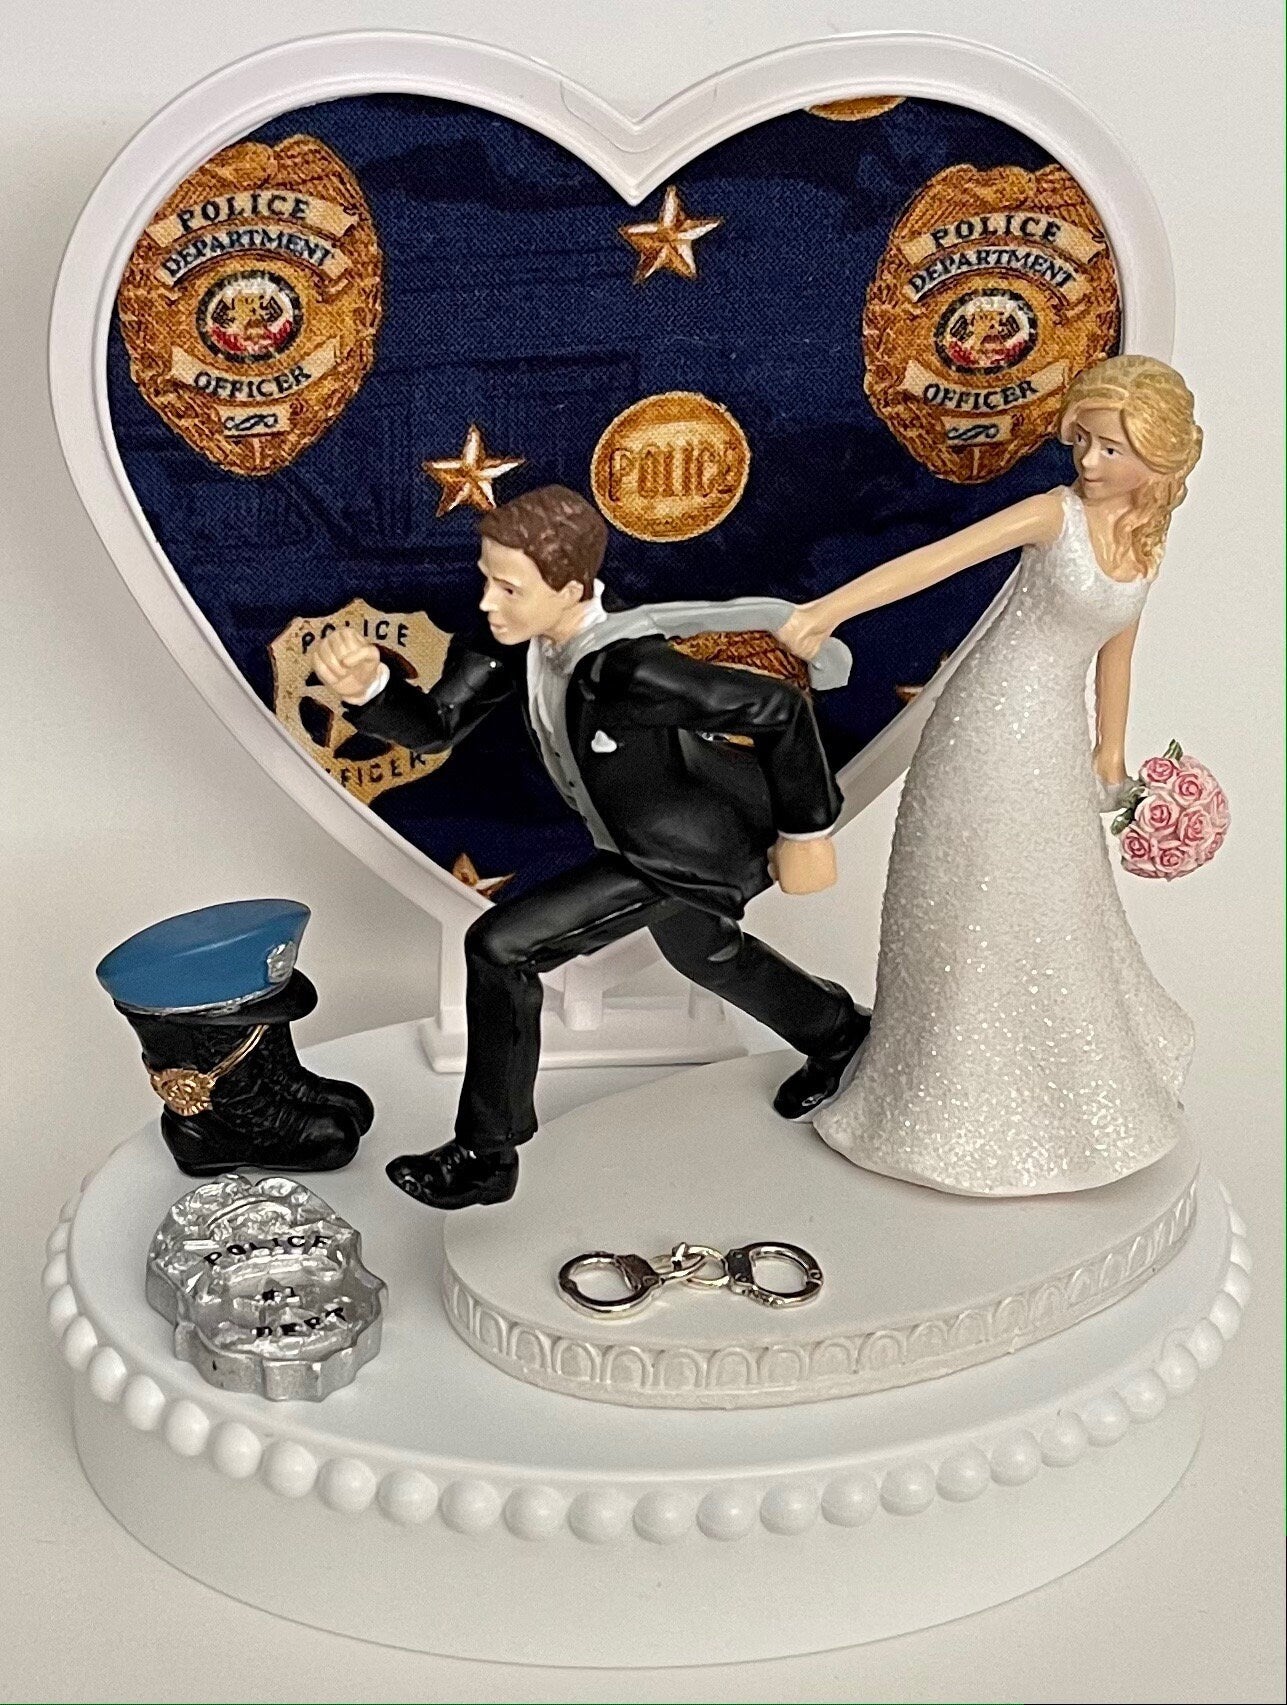 Wedding Cake Topper Police Officer Themed Policeman Badge Boot Handcuffs Law Enforcement Job Fun Bride Groom Funny Bridal Shower Gift Idea